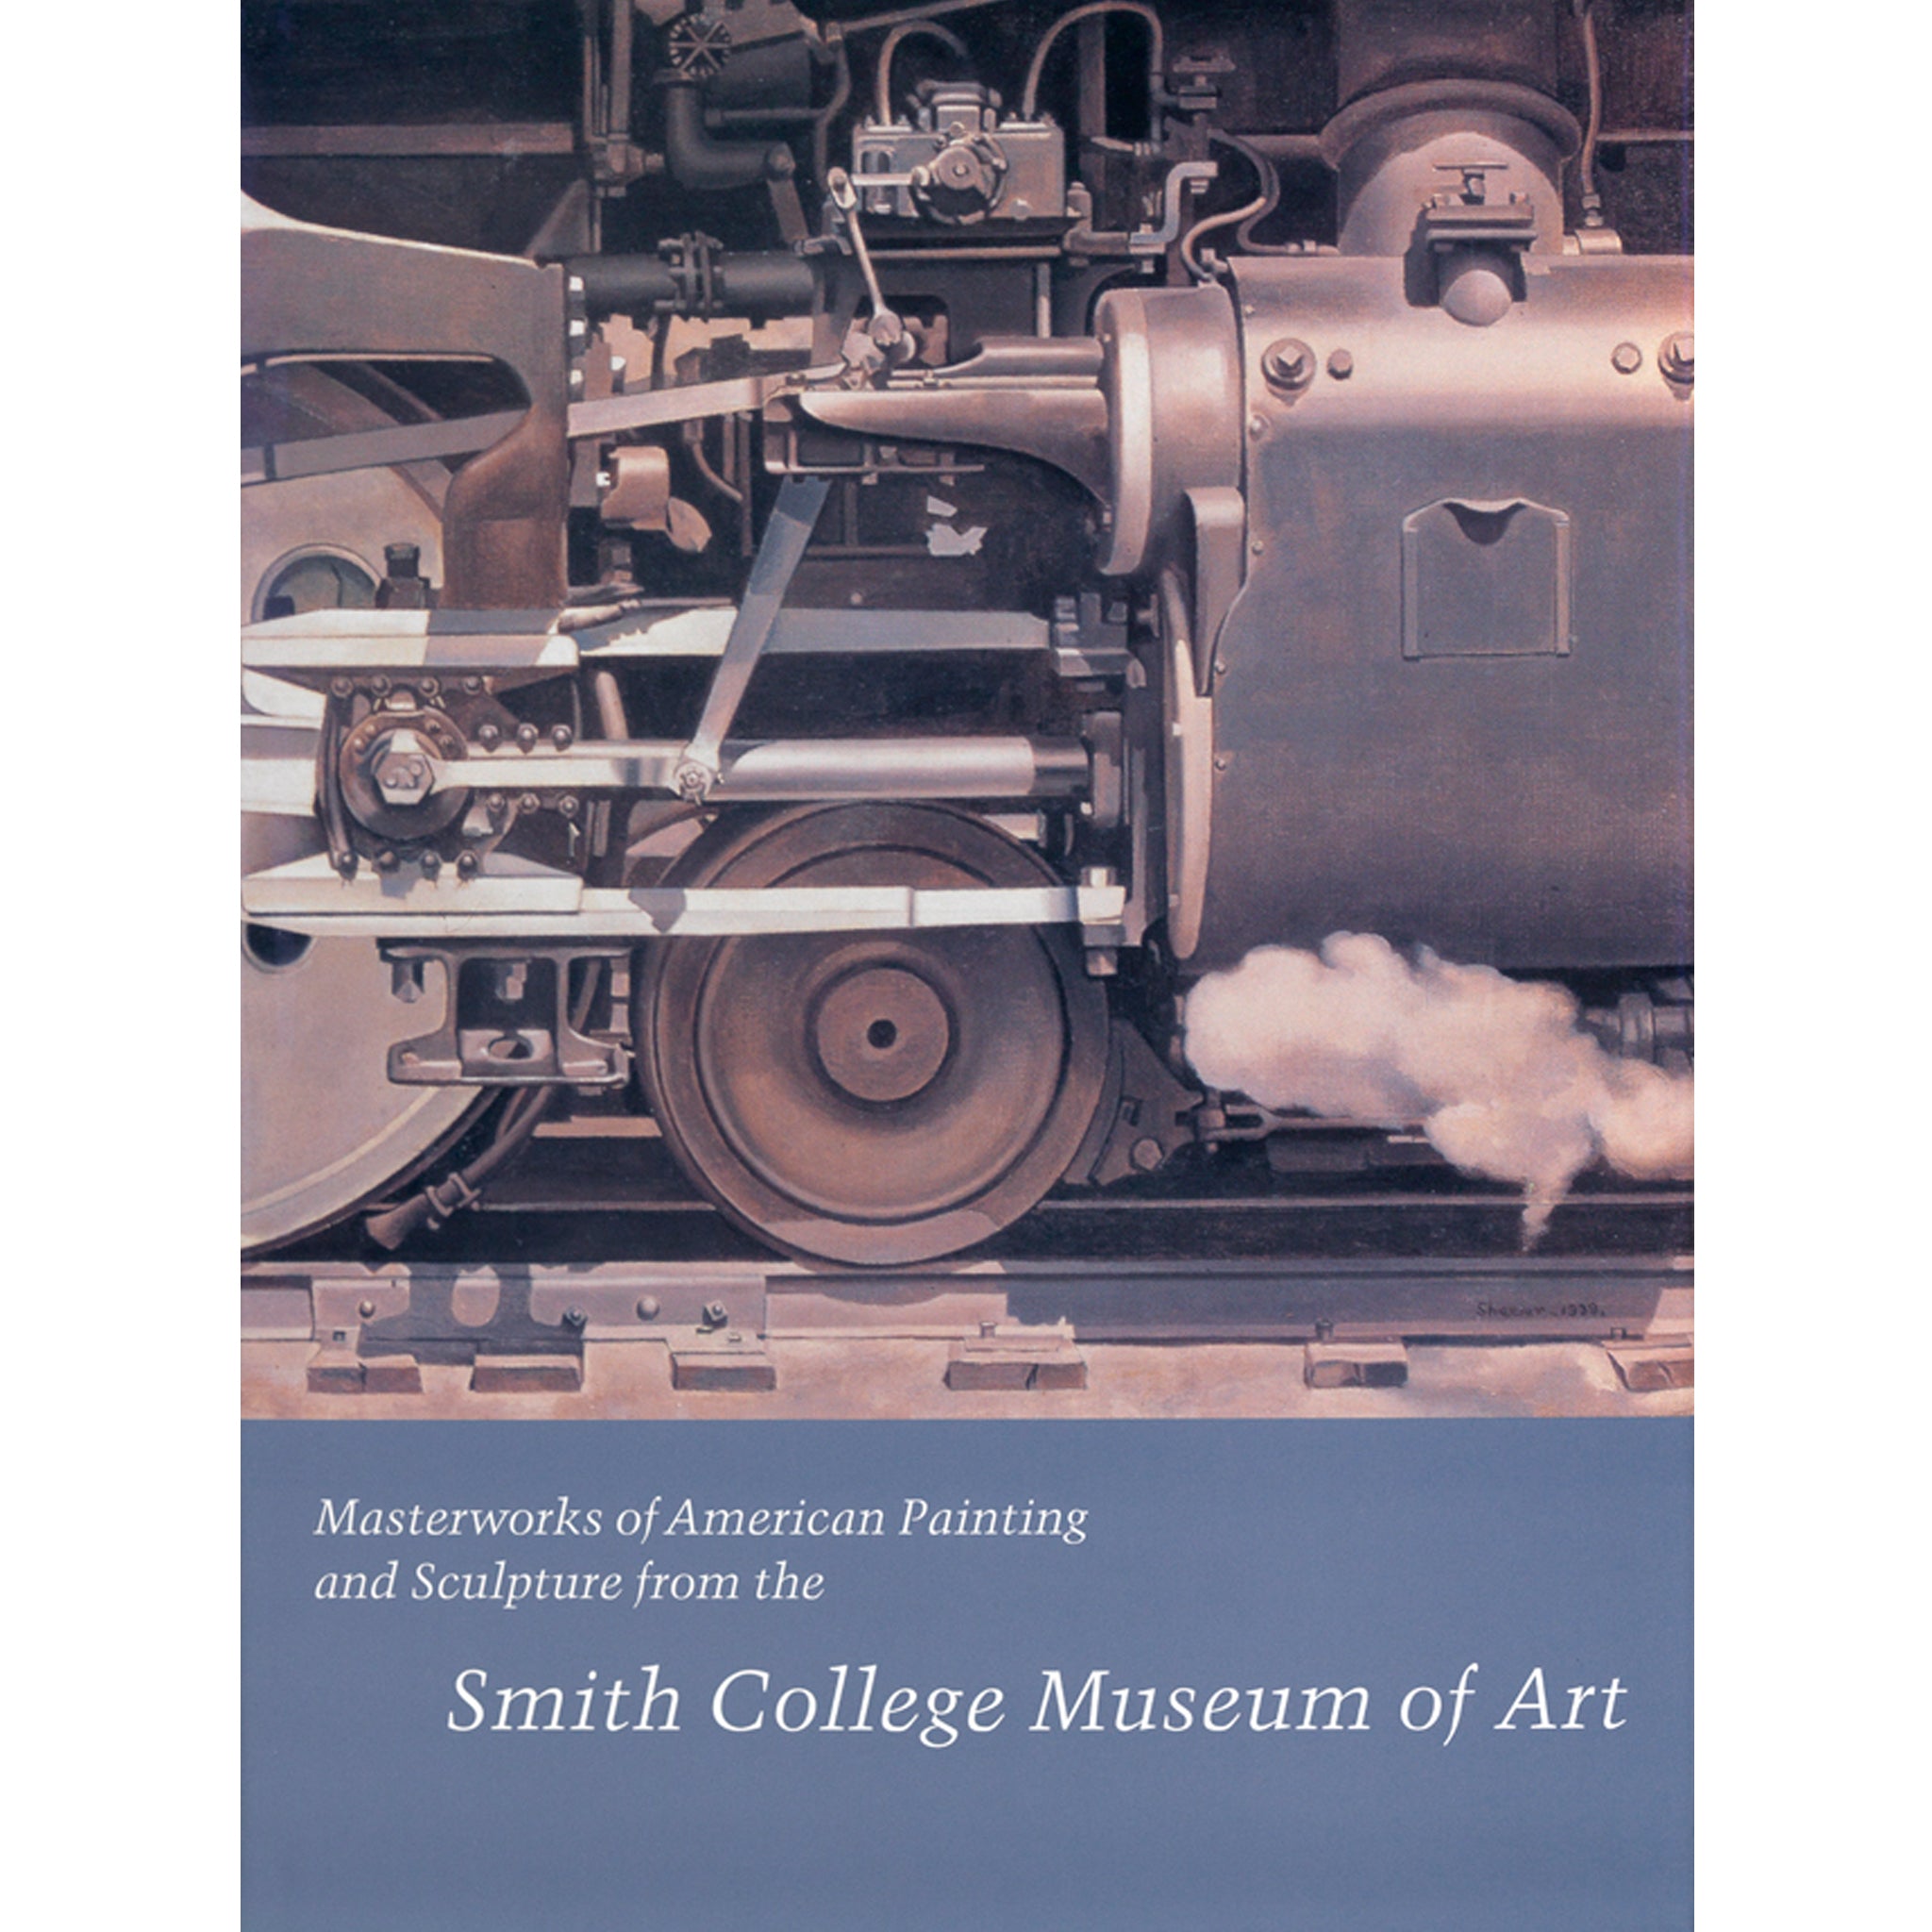 American masterworks painting sculpture collection exhibit catalog catalogue scma smith college museum of art